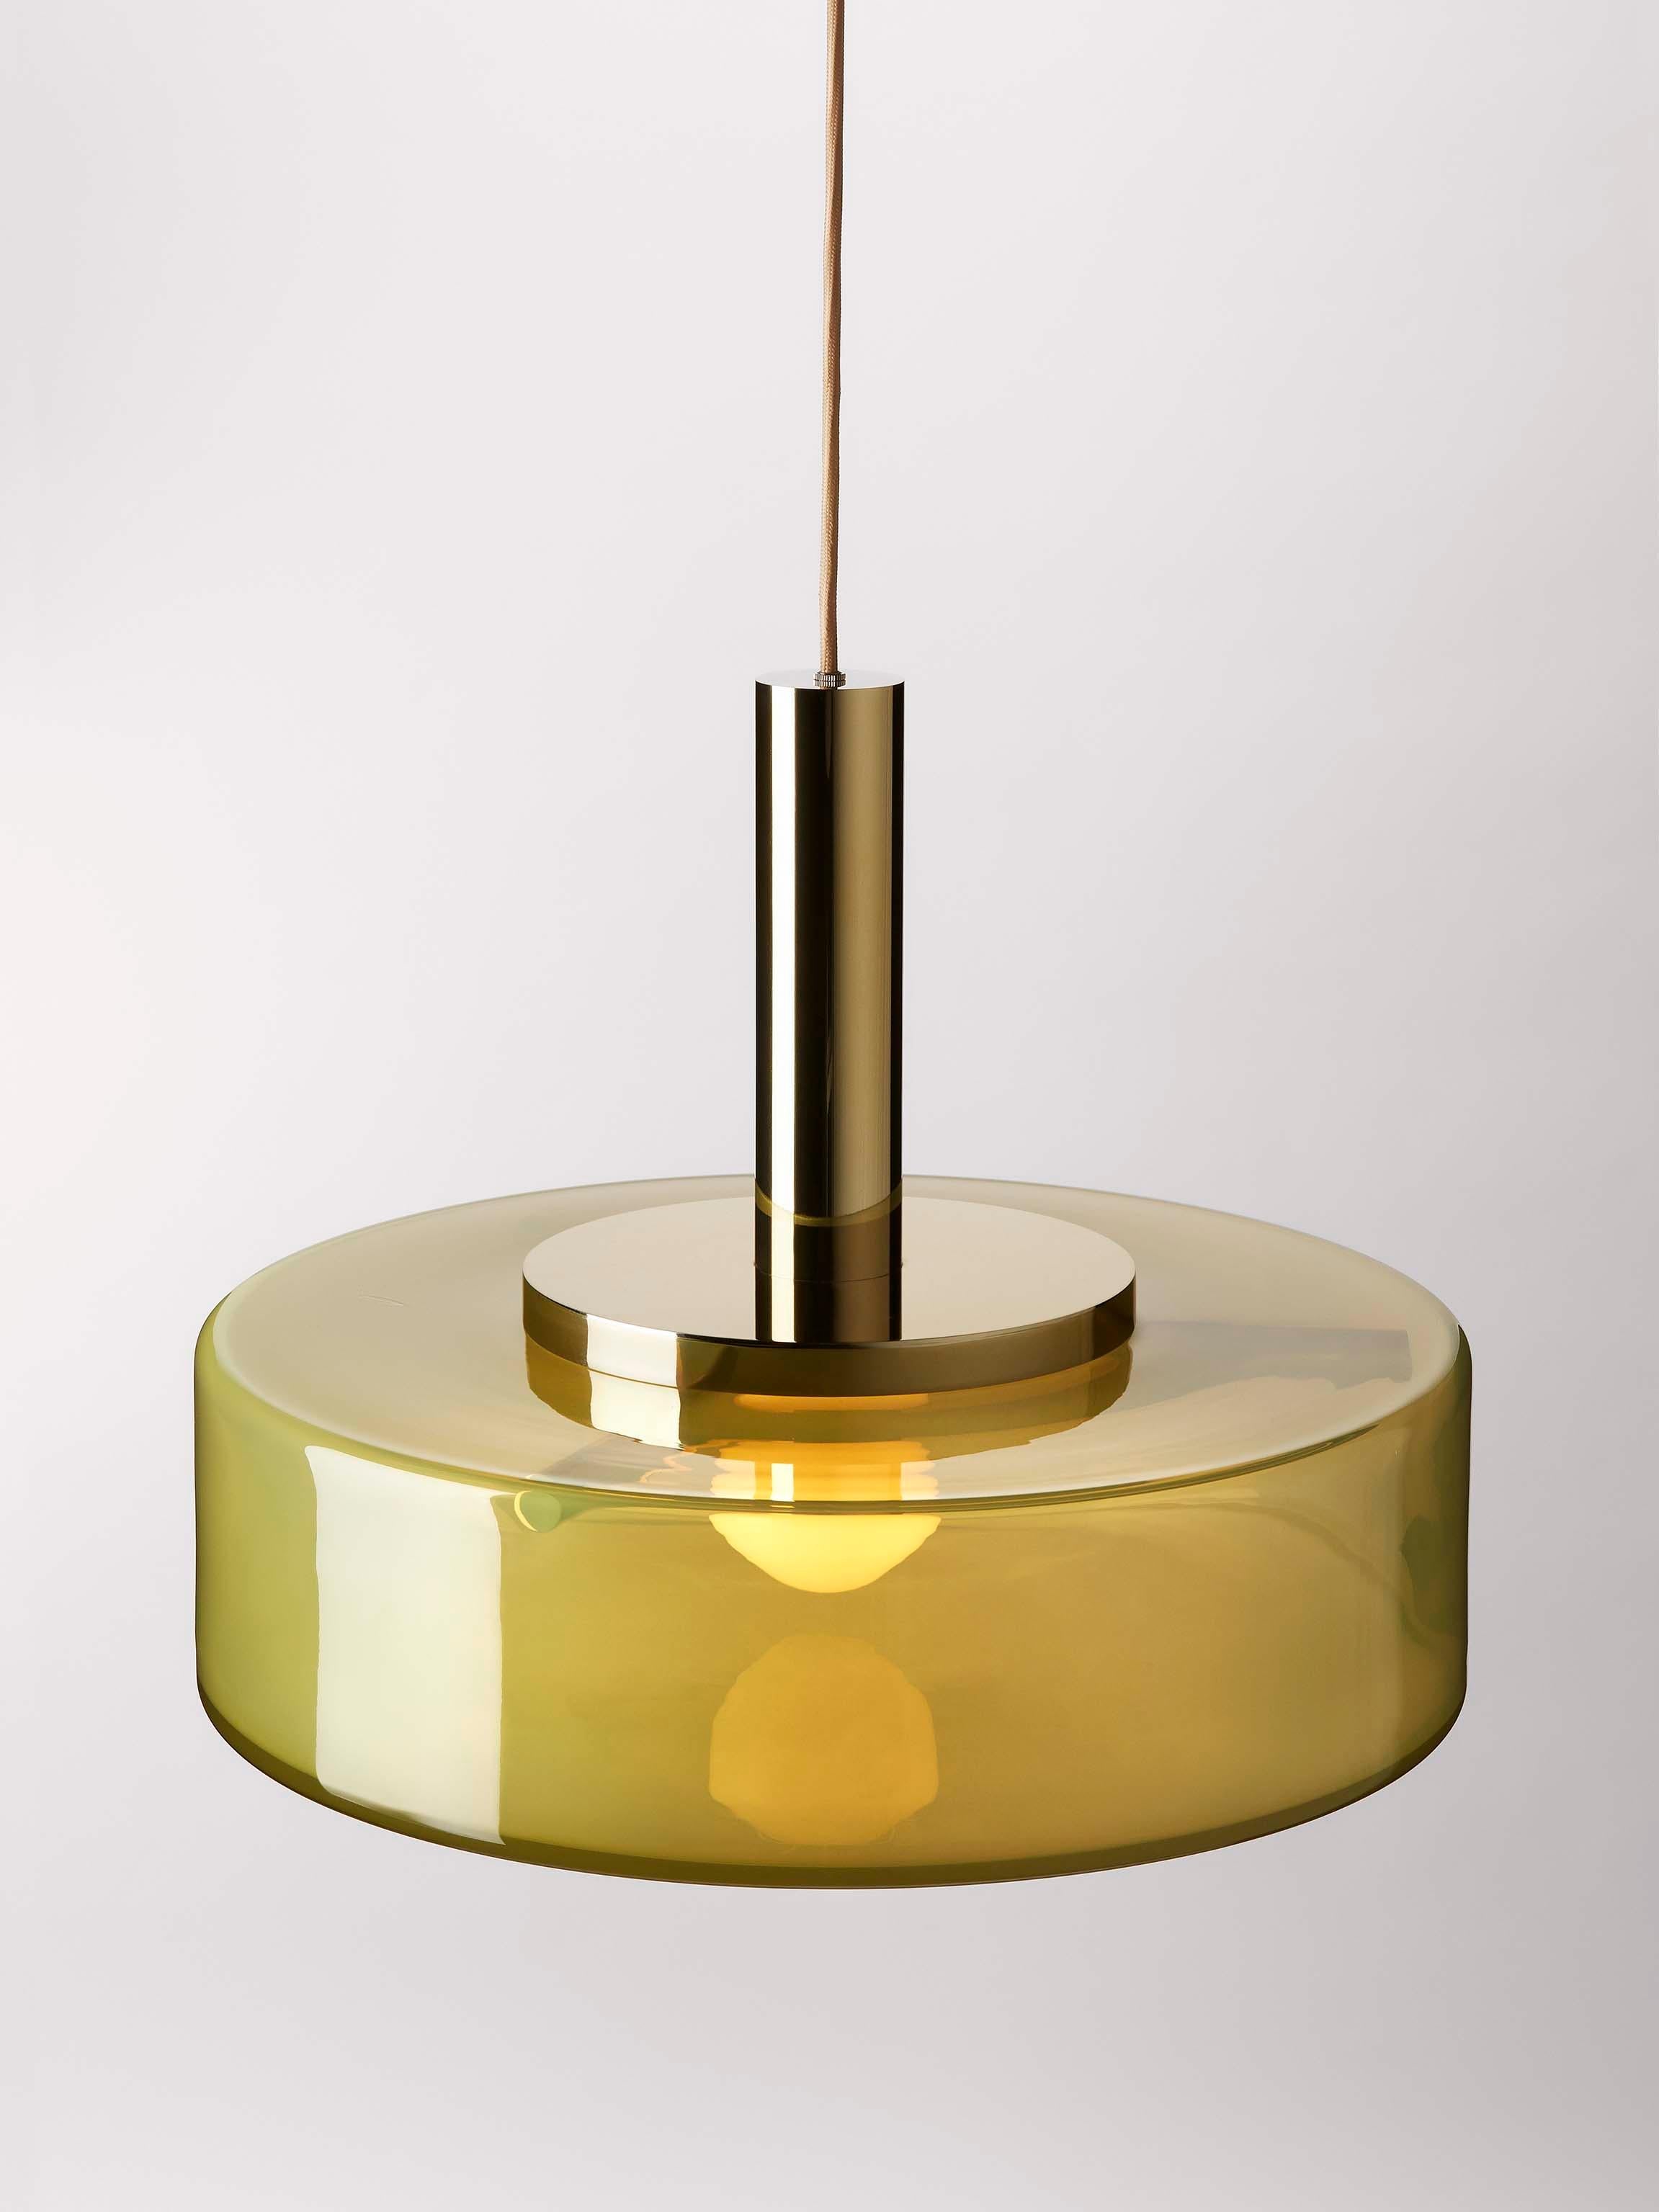 Green pendant light by Dechem Studio
Dimensions: D 56 x H 180 cm
Materials: Brass, glass.
Also available: different colours and sizes available

Named after the series of successful Czechoslovak science satellites that orbited the Earth in the